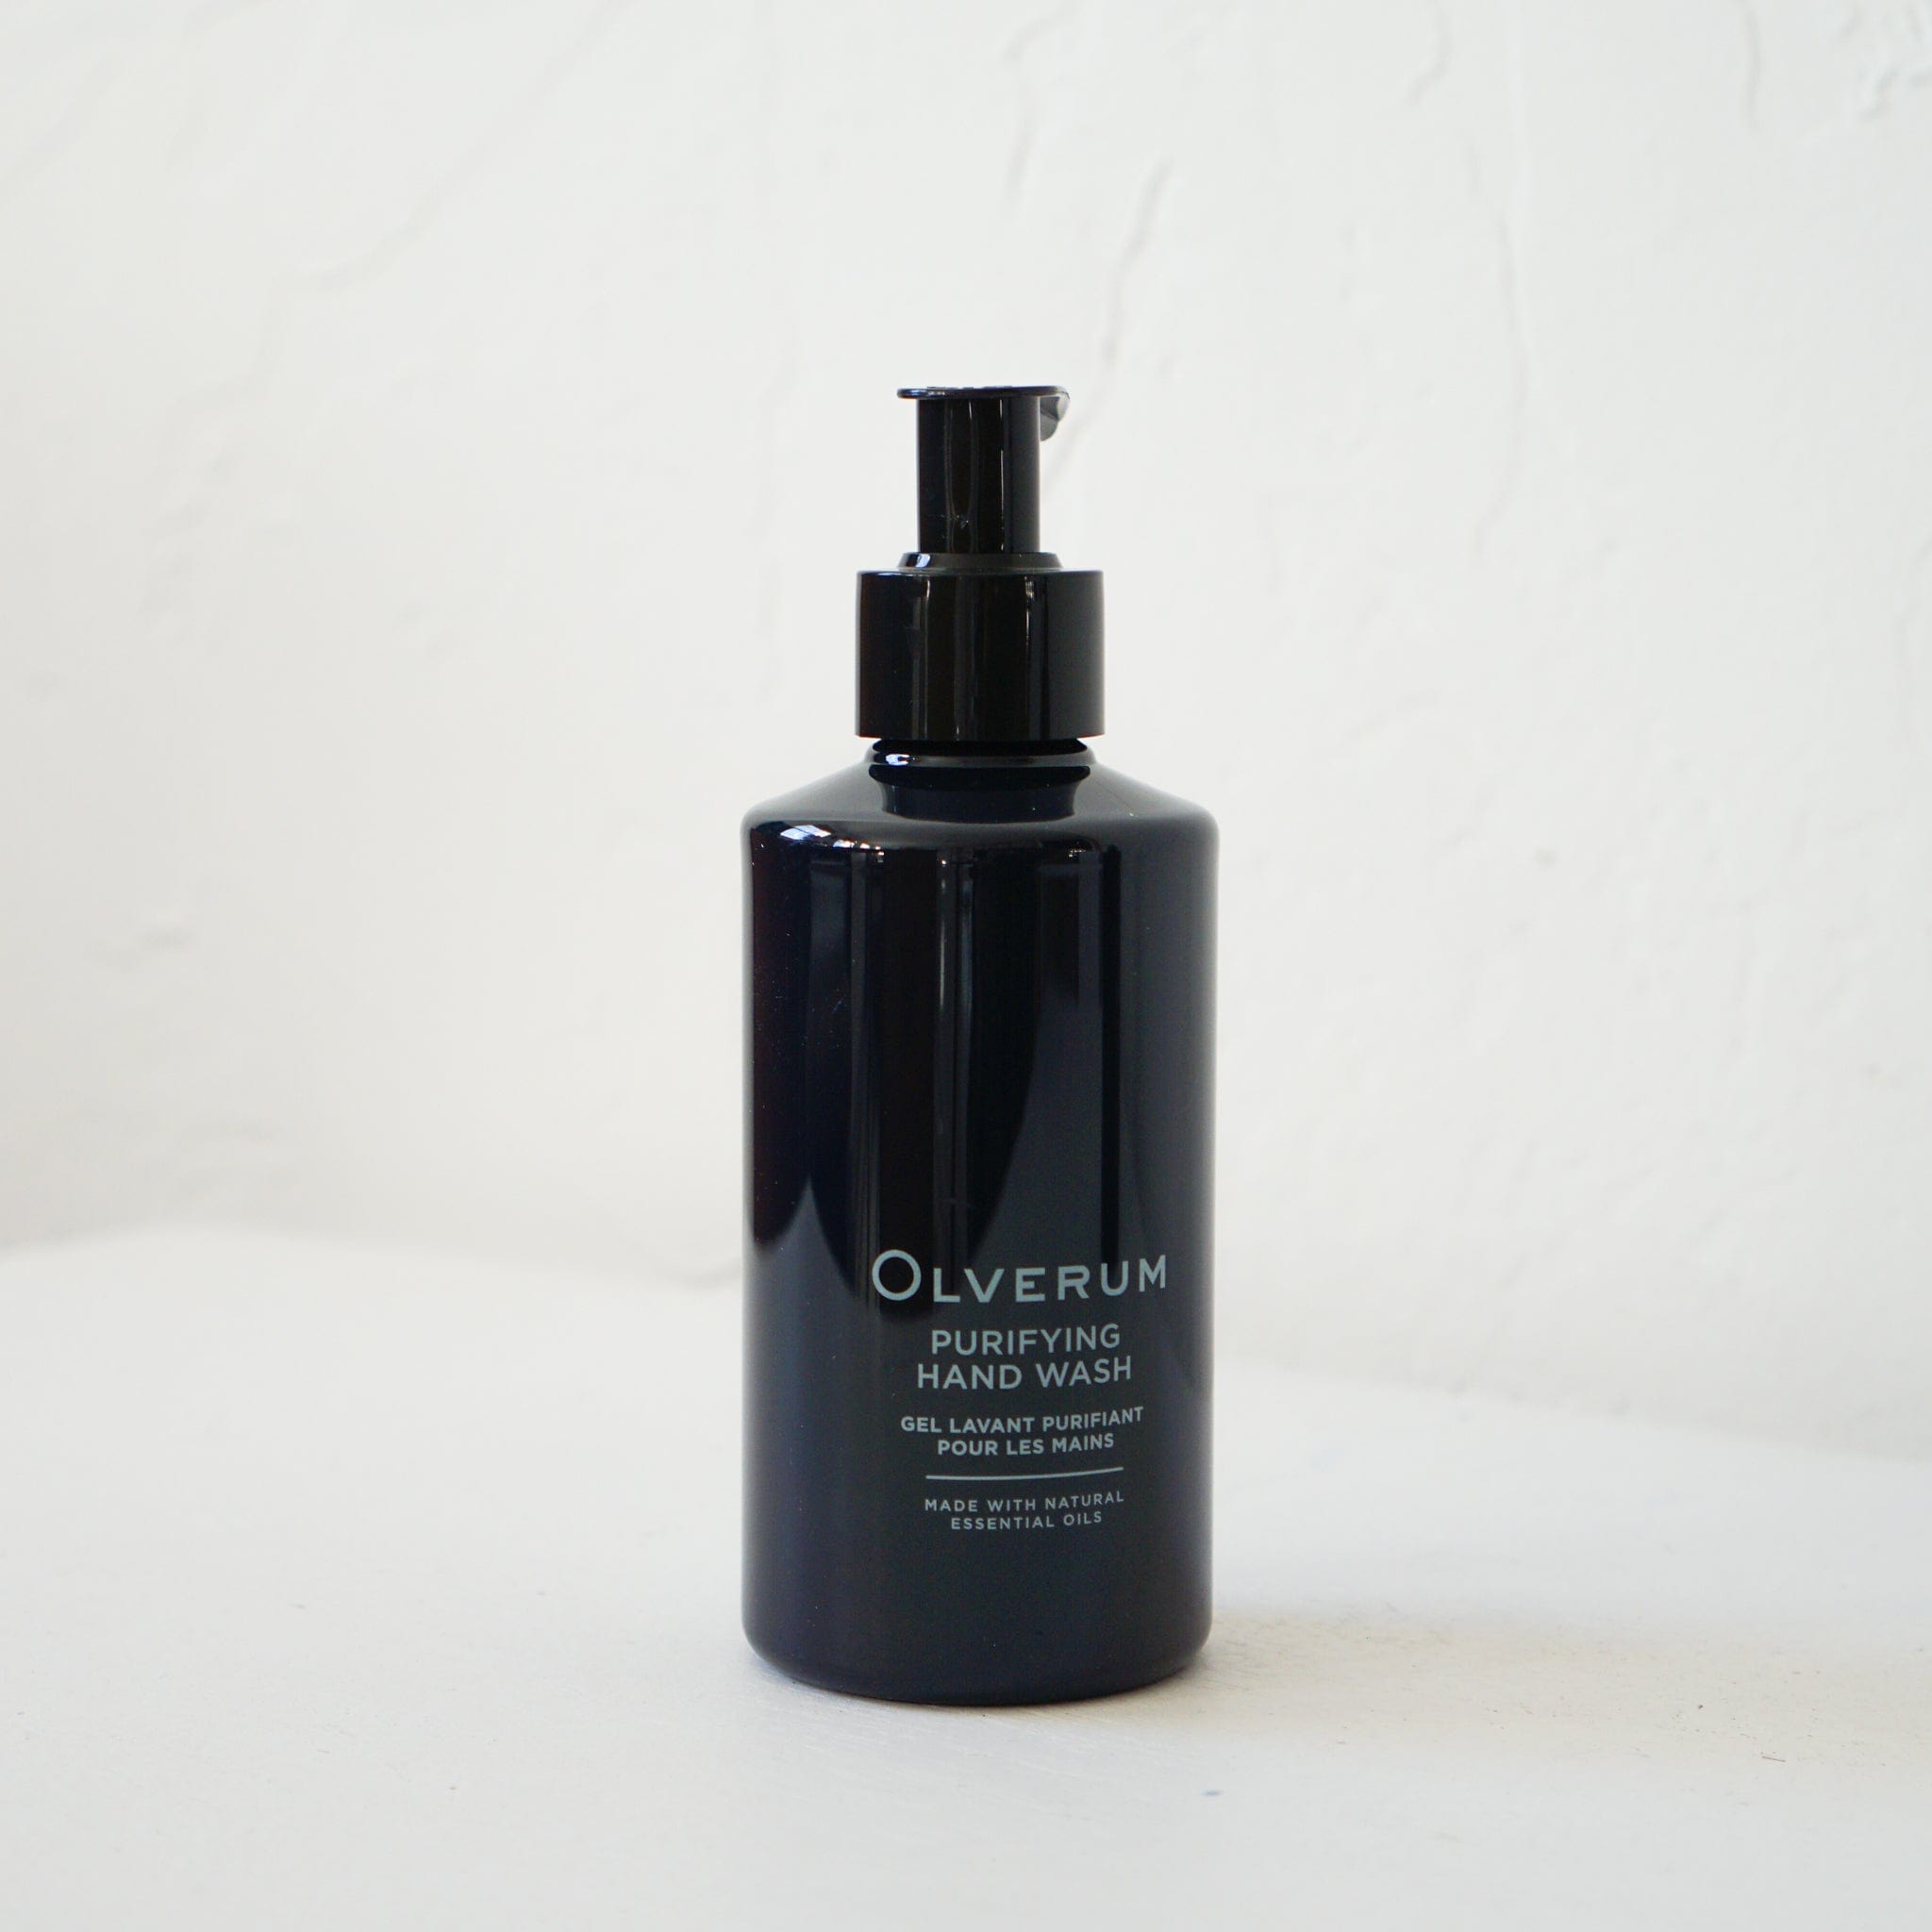 Olverum Apothecary Olverum Soothing Hand Lotion